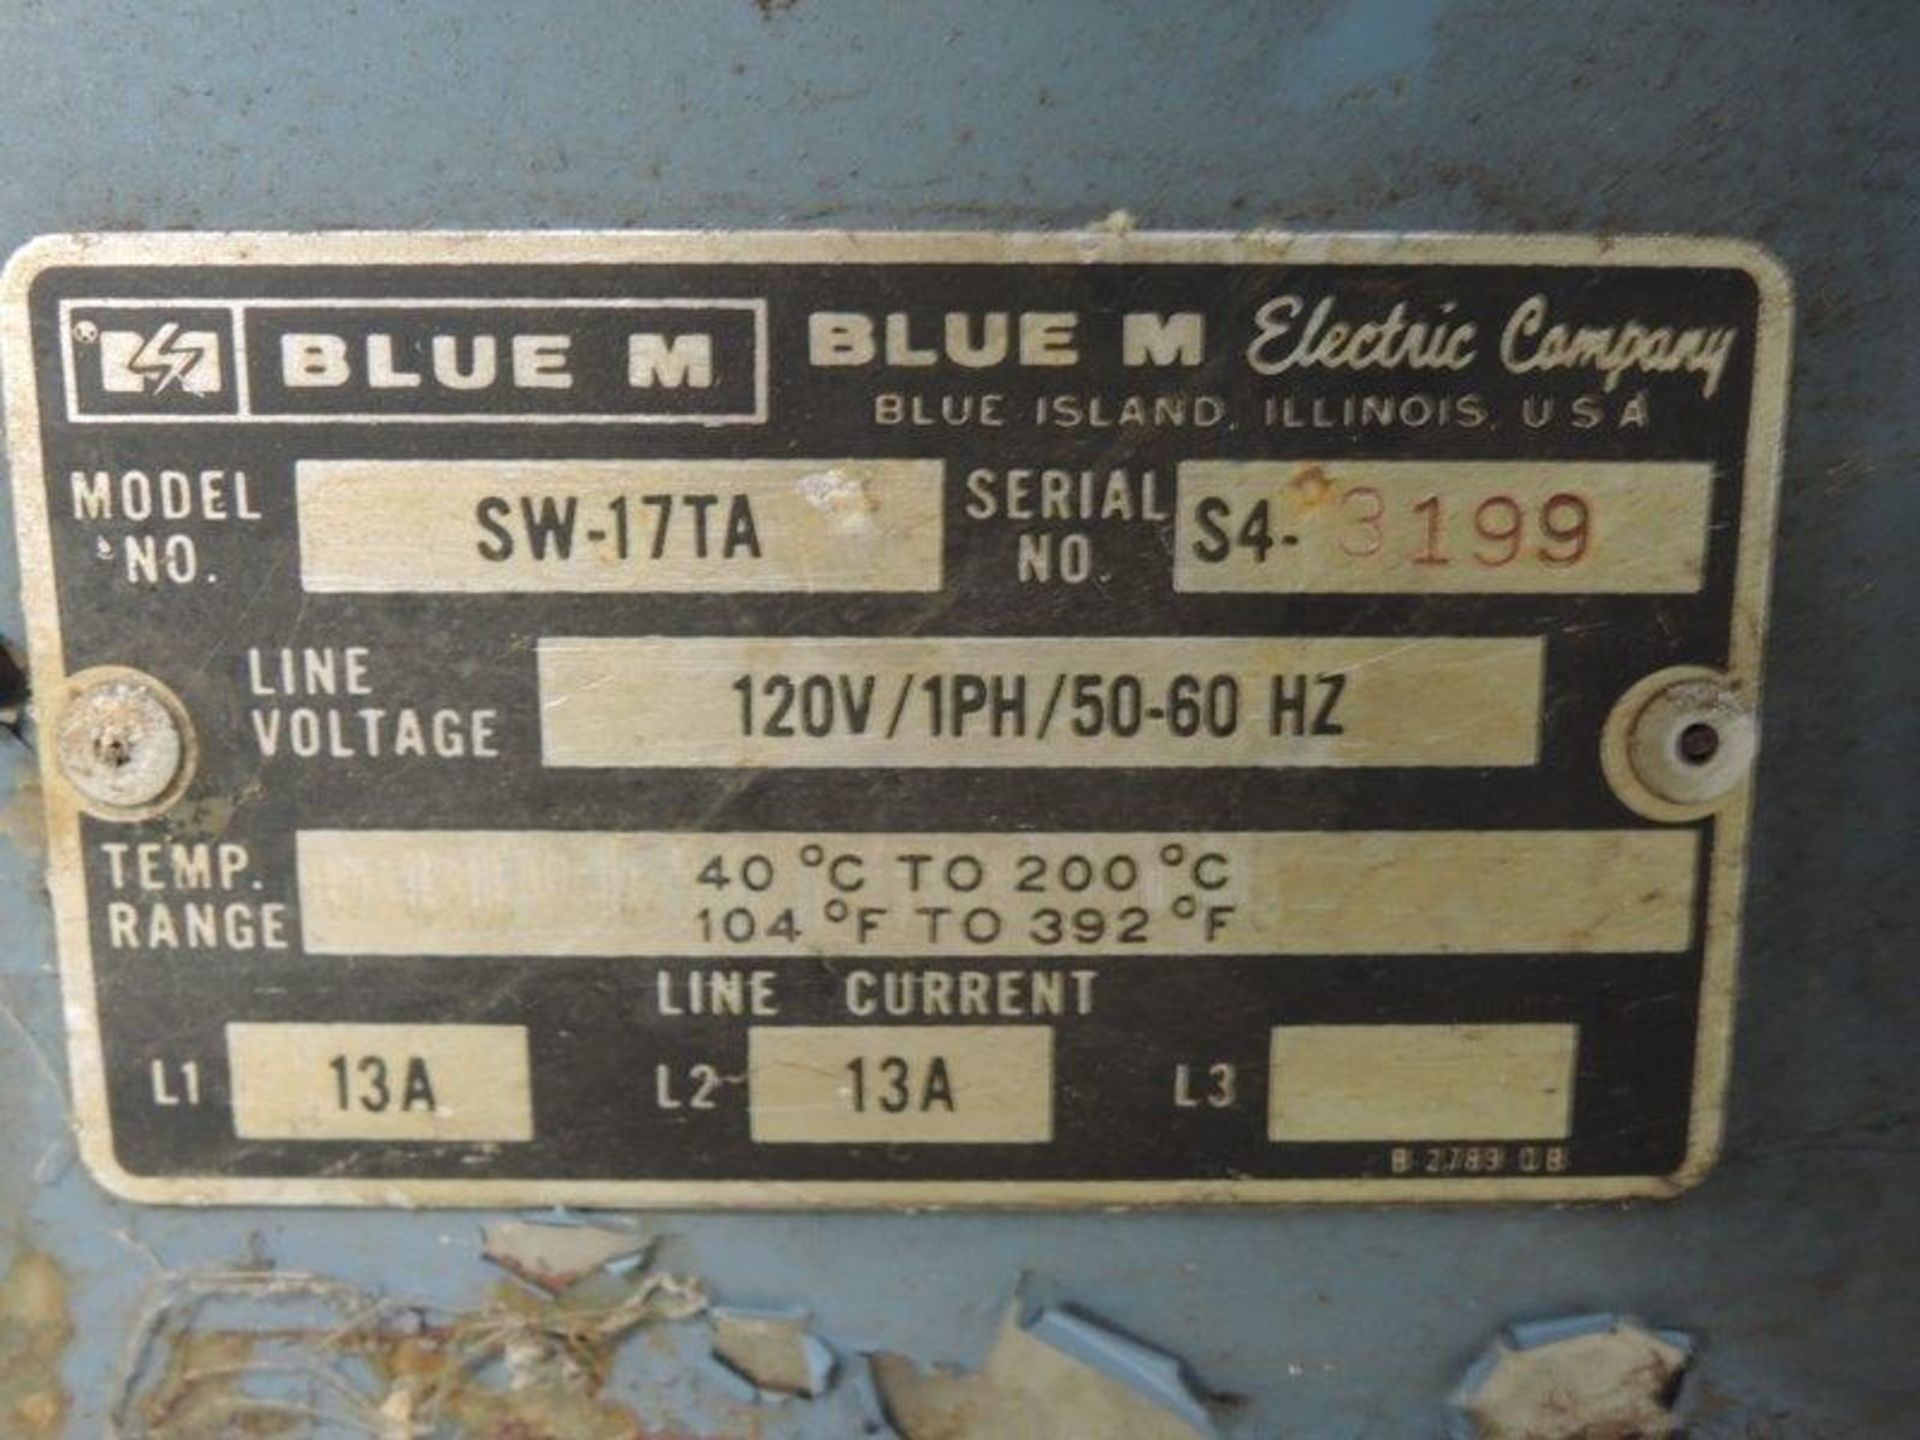 BLUE M MODEL SW-17TA S/N: 3199 OVEN UP TO 200 DEGREE C, 120V [WALTON HILLS, OH] - Image 4 of 4